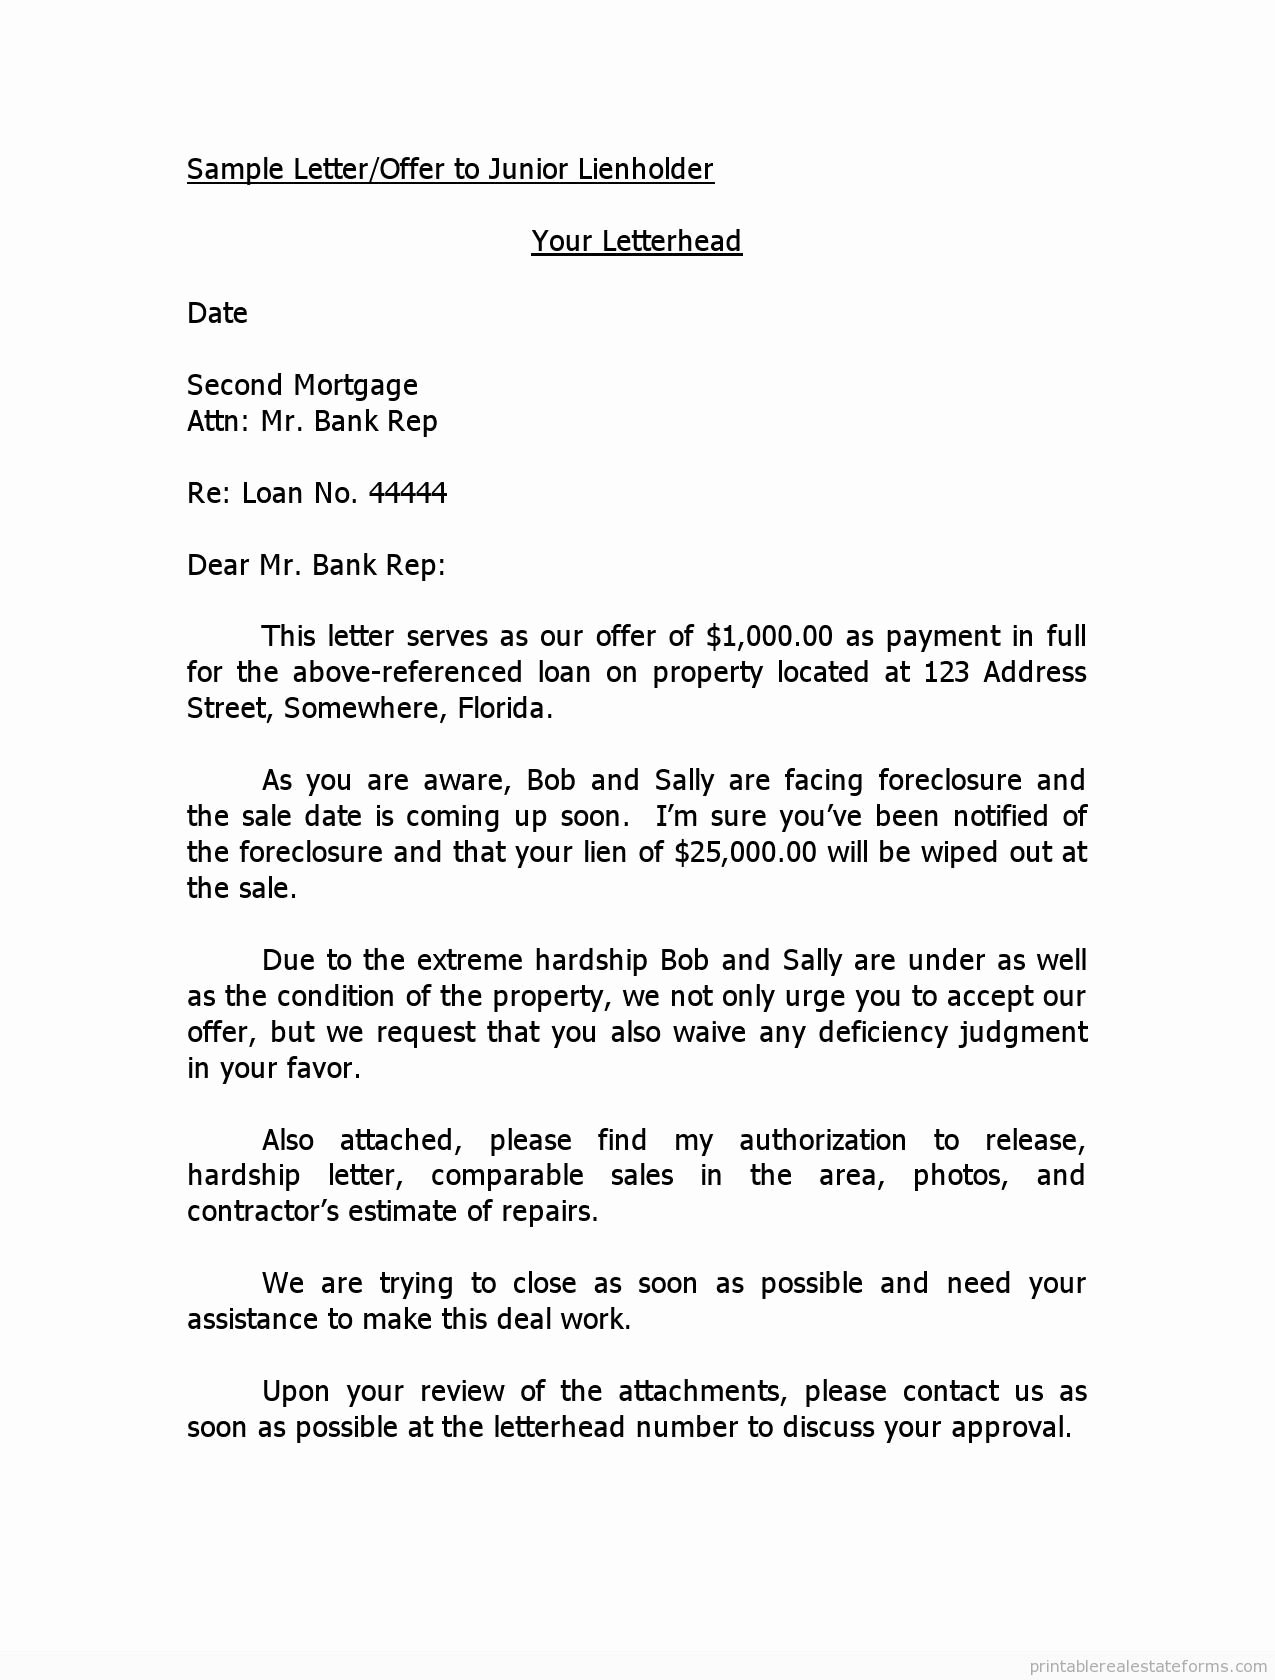 Sample Letter Of Explanation for Buying Second Home New Sample Fer Letter for Real Estate Free Printable